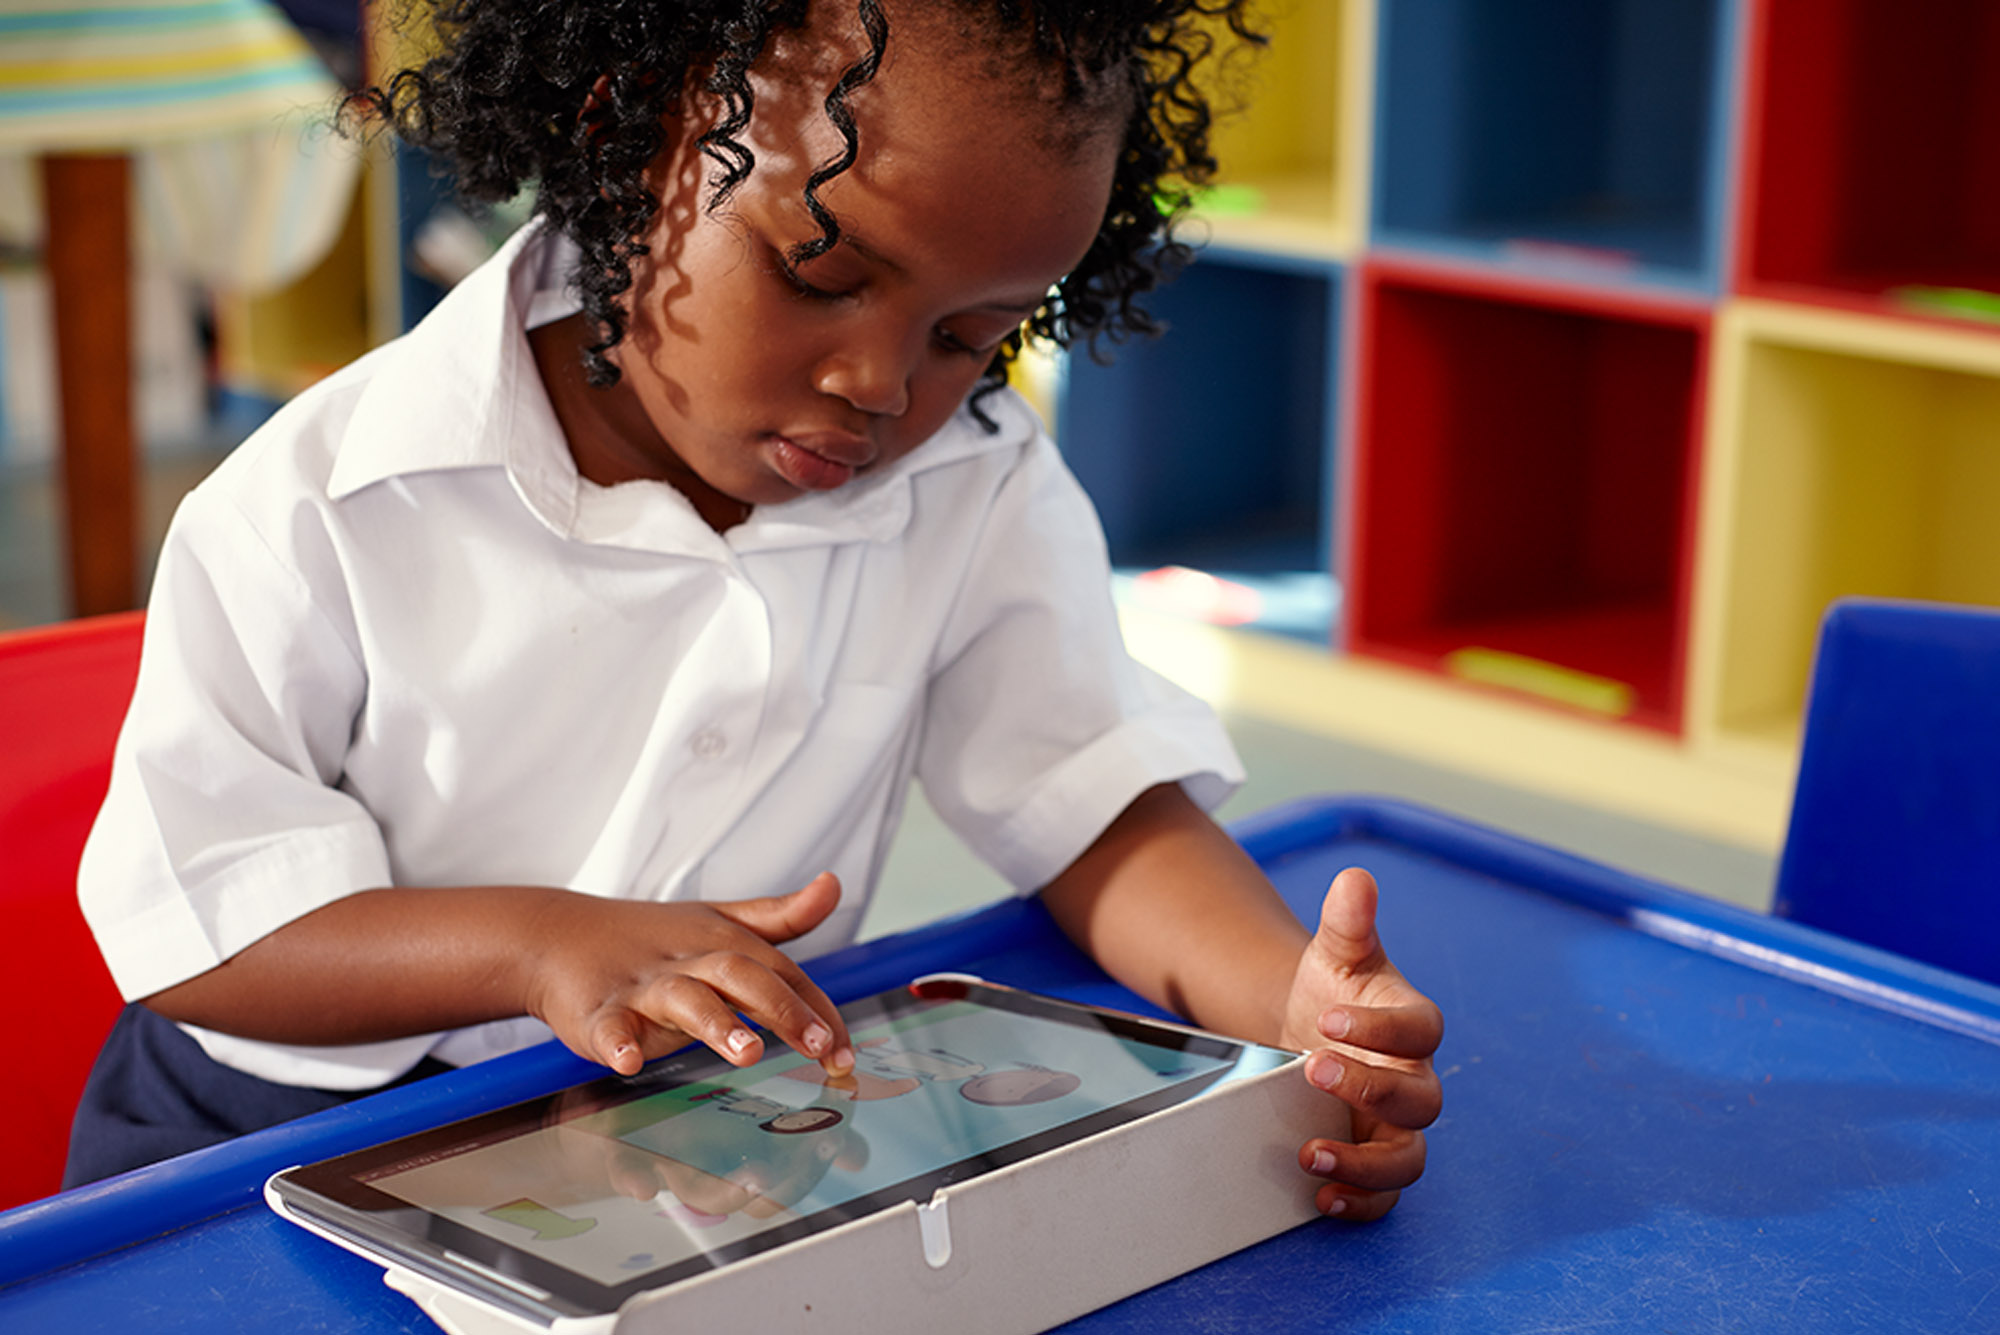 Young learner on tablet in classroom